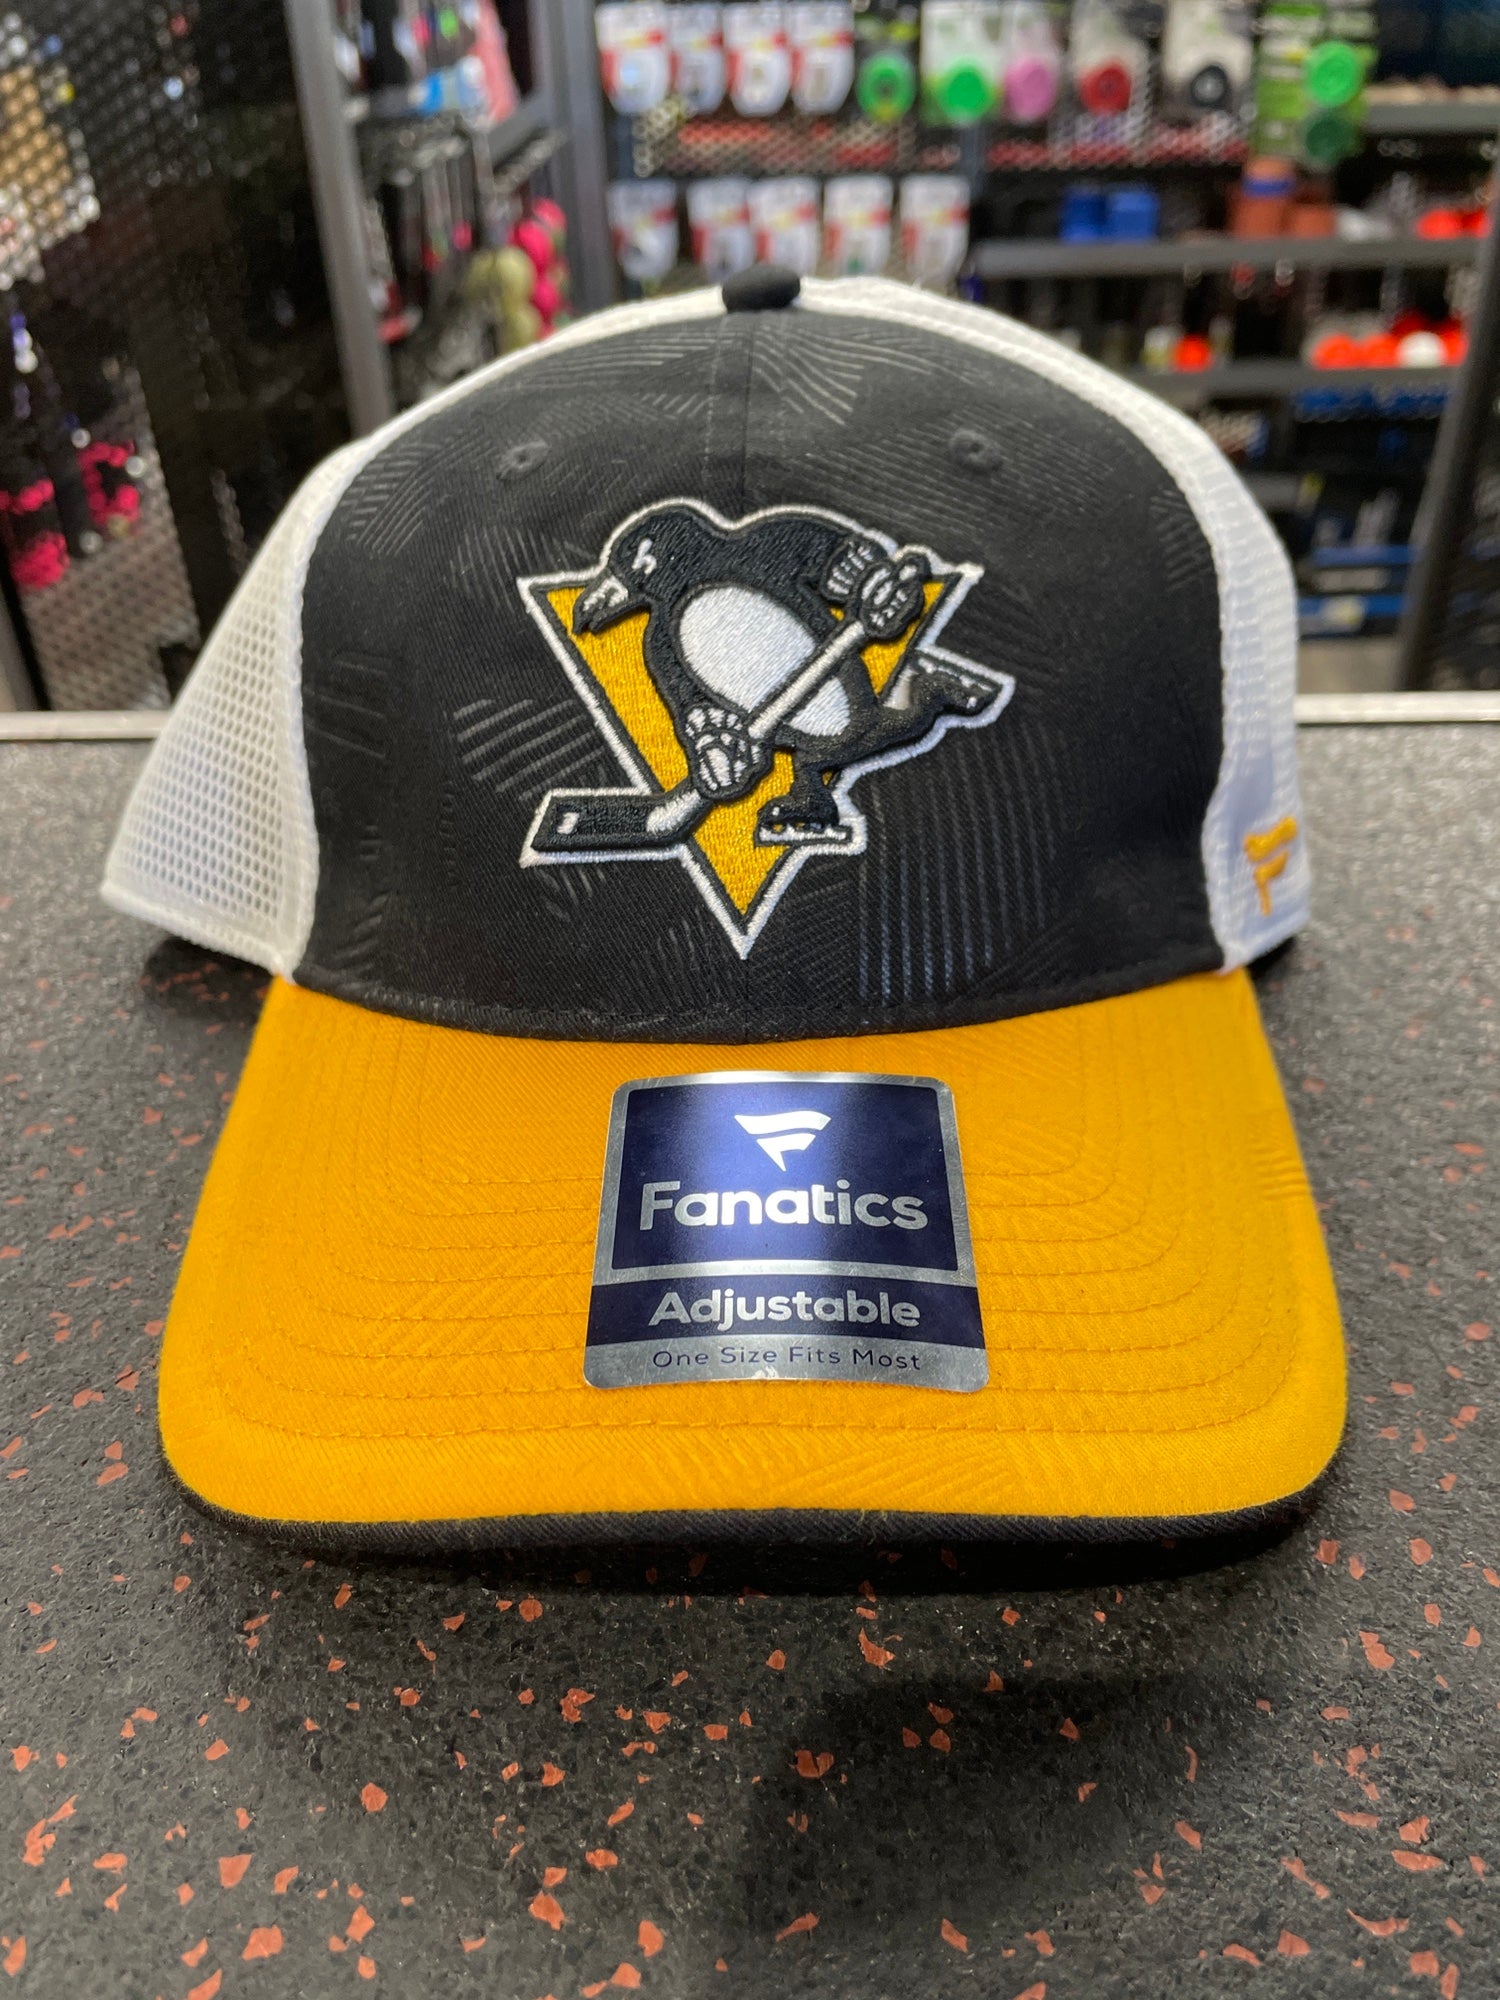 Fanatics lists it as the alternate hat, but I don't think the Sox